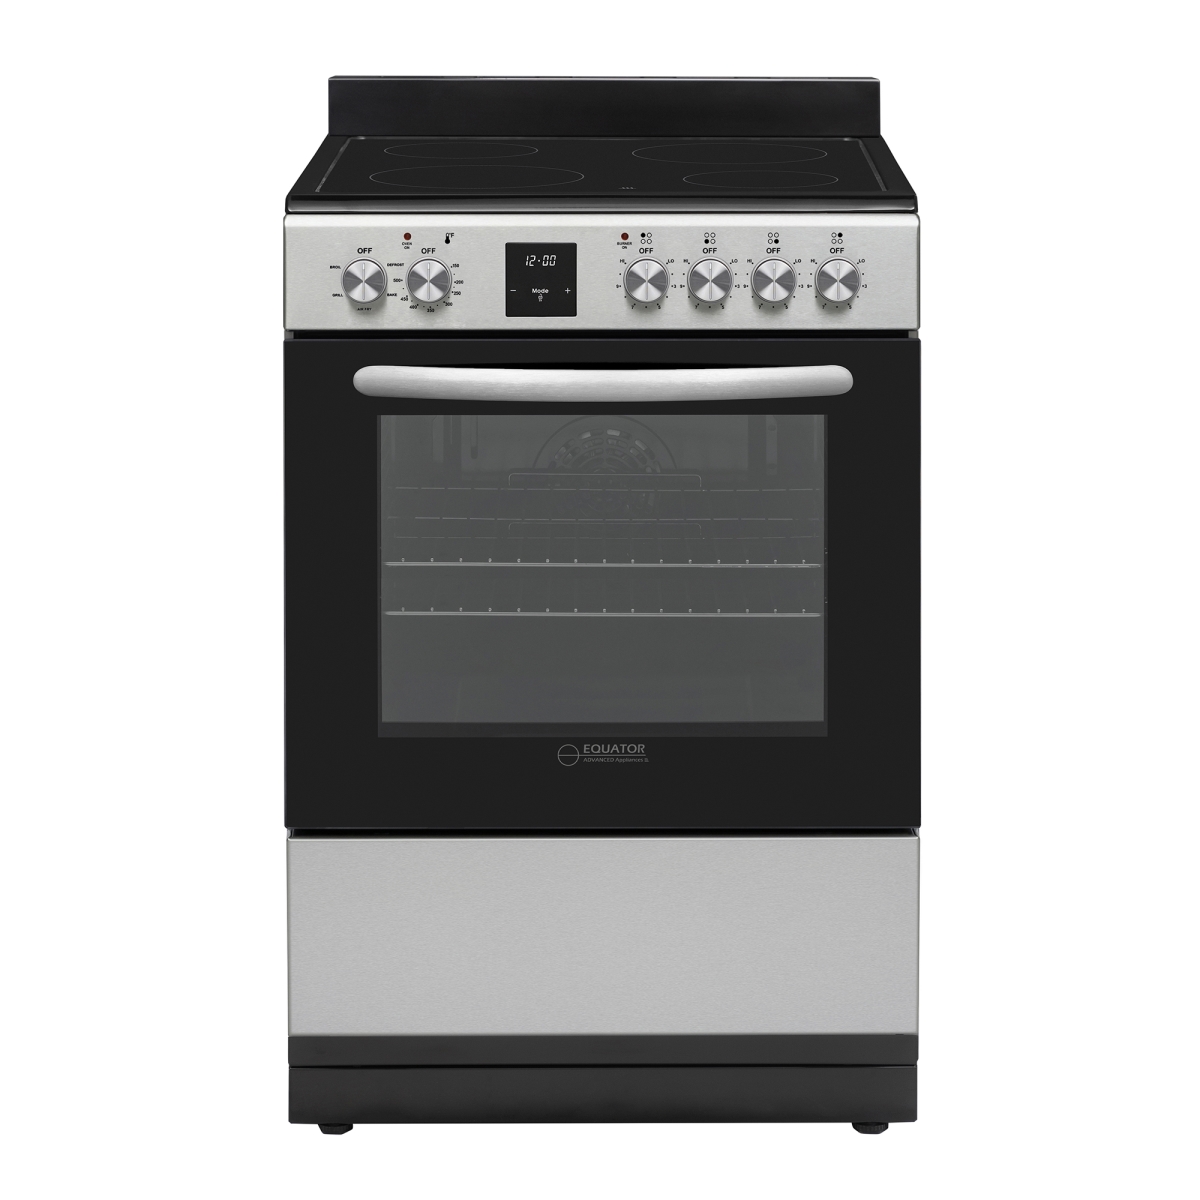 Picture of Equator Advanced Appliances ECR 244 Stainless Equator 24 Freestanding Electric Cooking Range in Stainless with Convection Oven